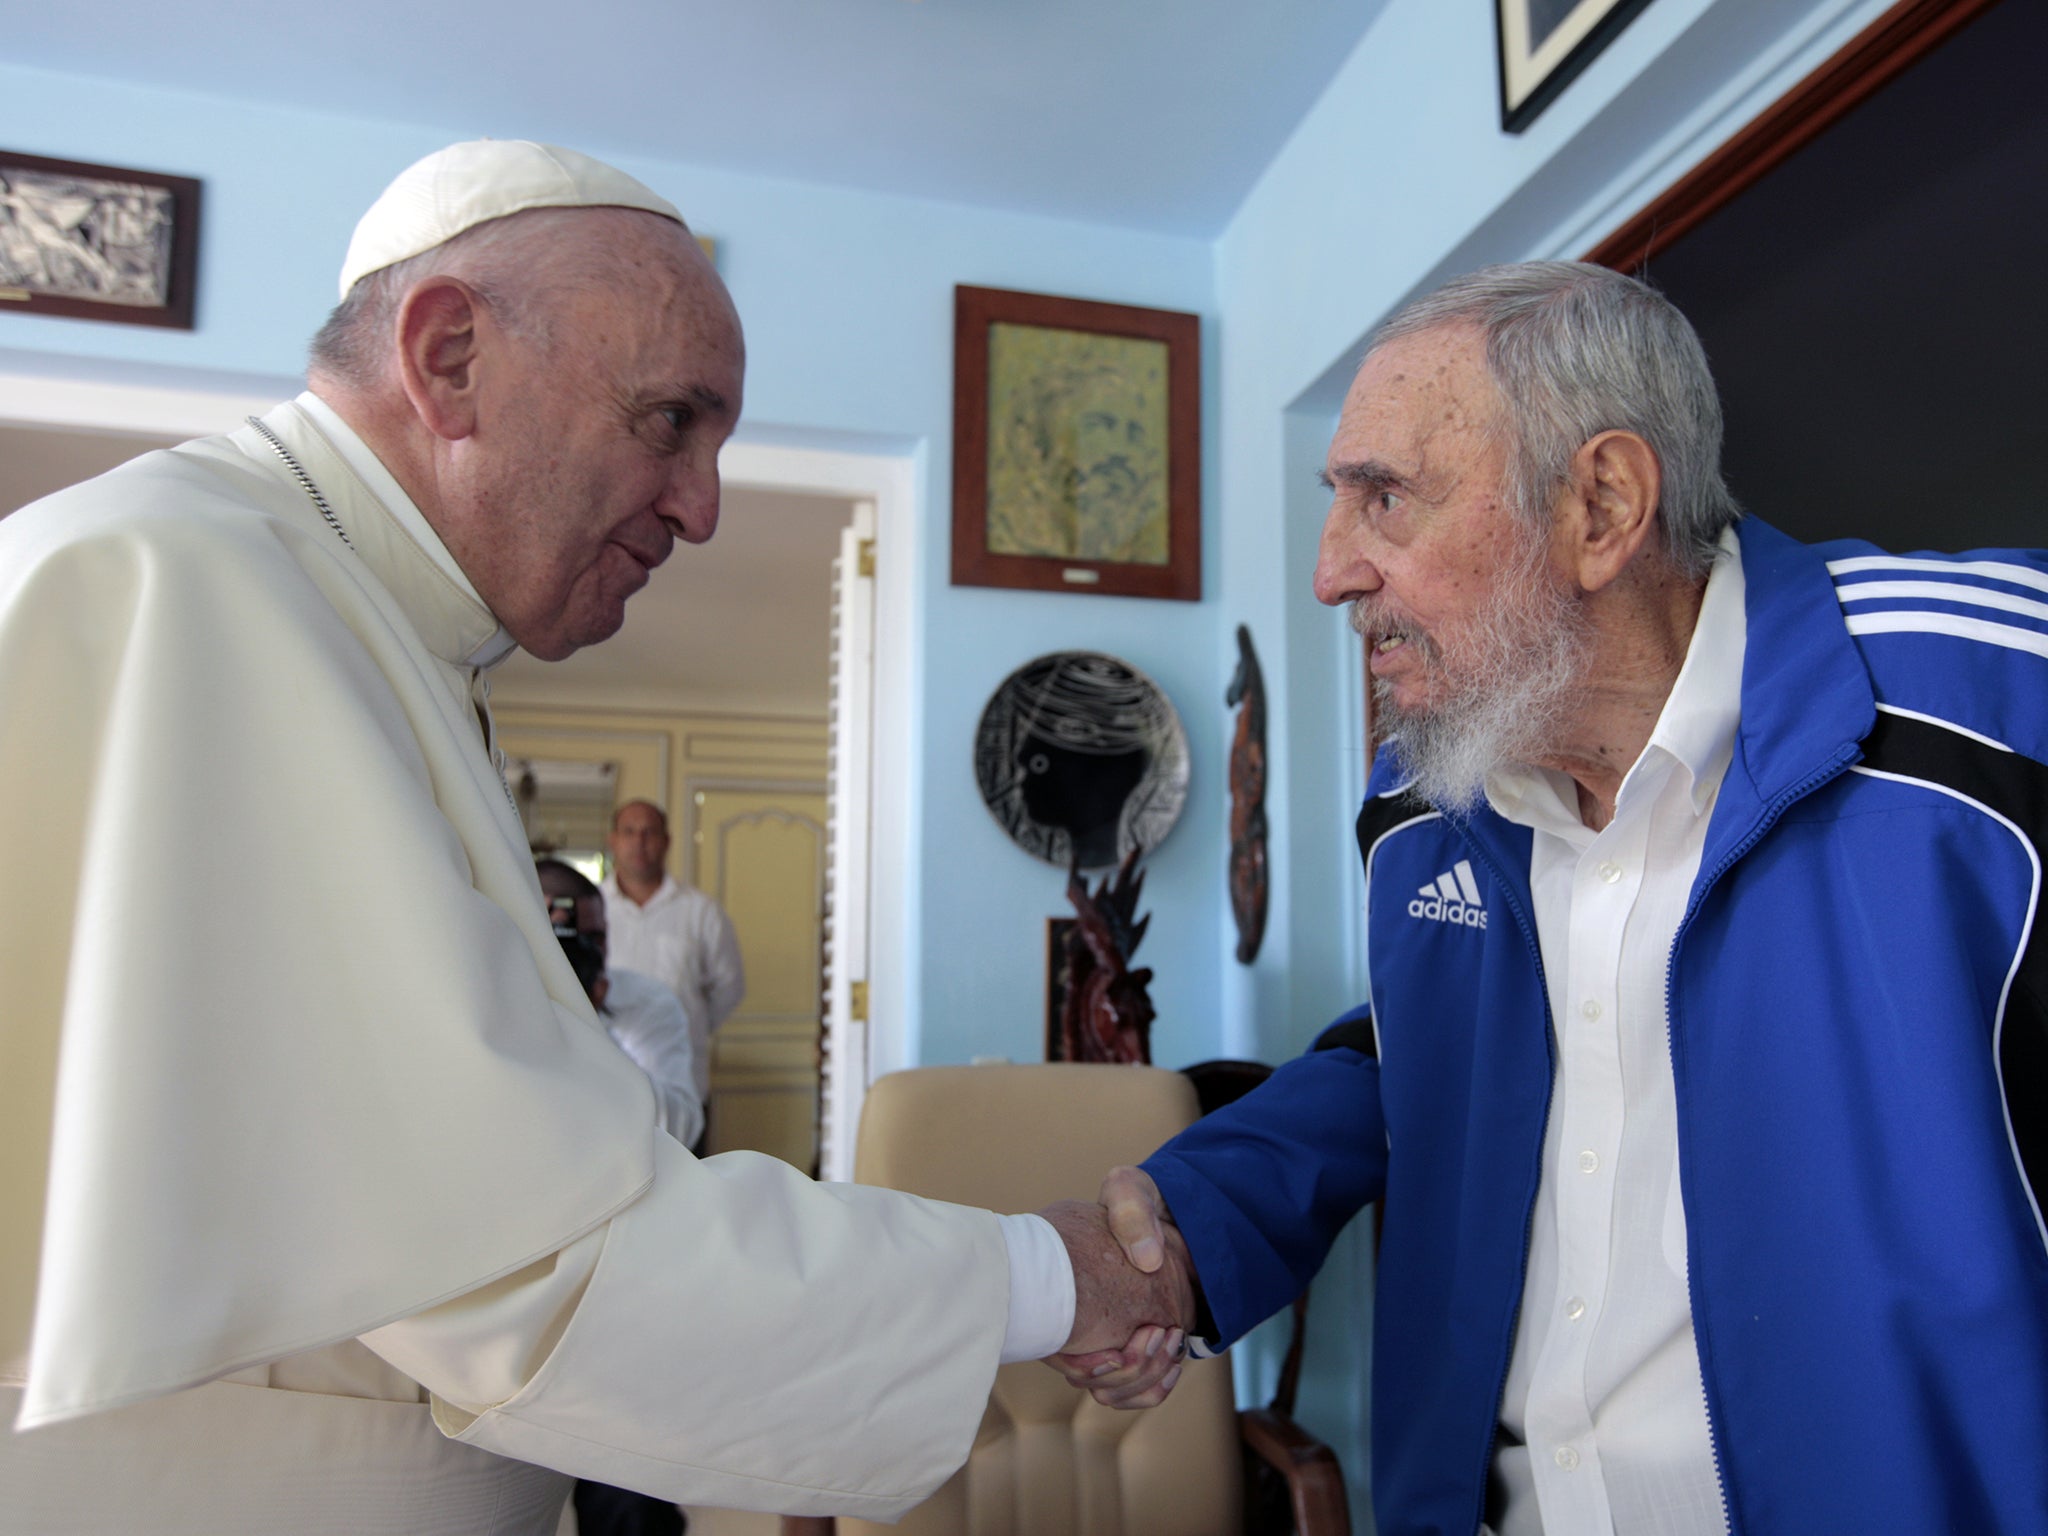 Pope Francis and Cuba's Fidel Castro shakes hands, in Havana, Cuba. The Vatican described the 40-minute meeting at Castro's residence as informal and familial, with an exchange of books